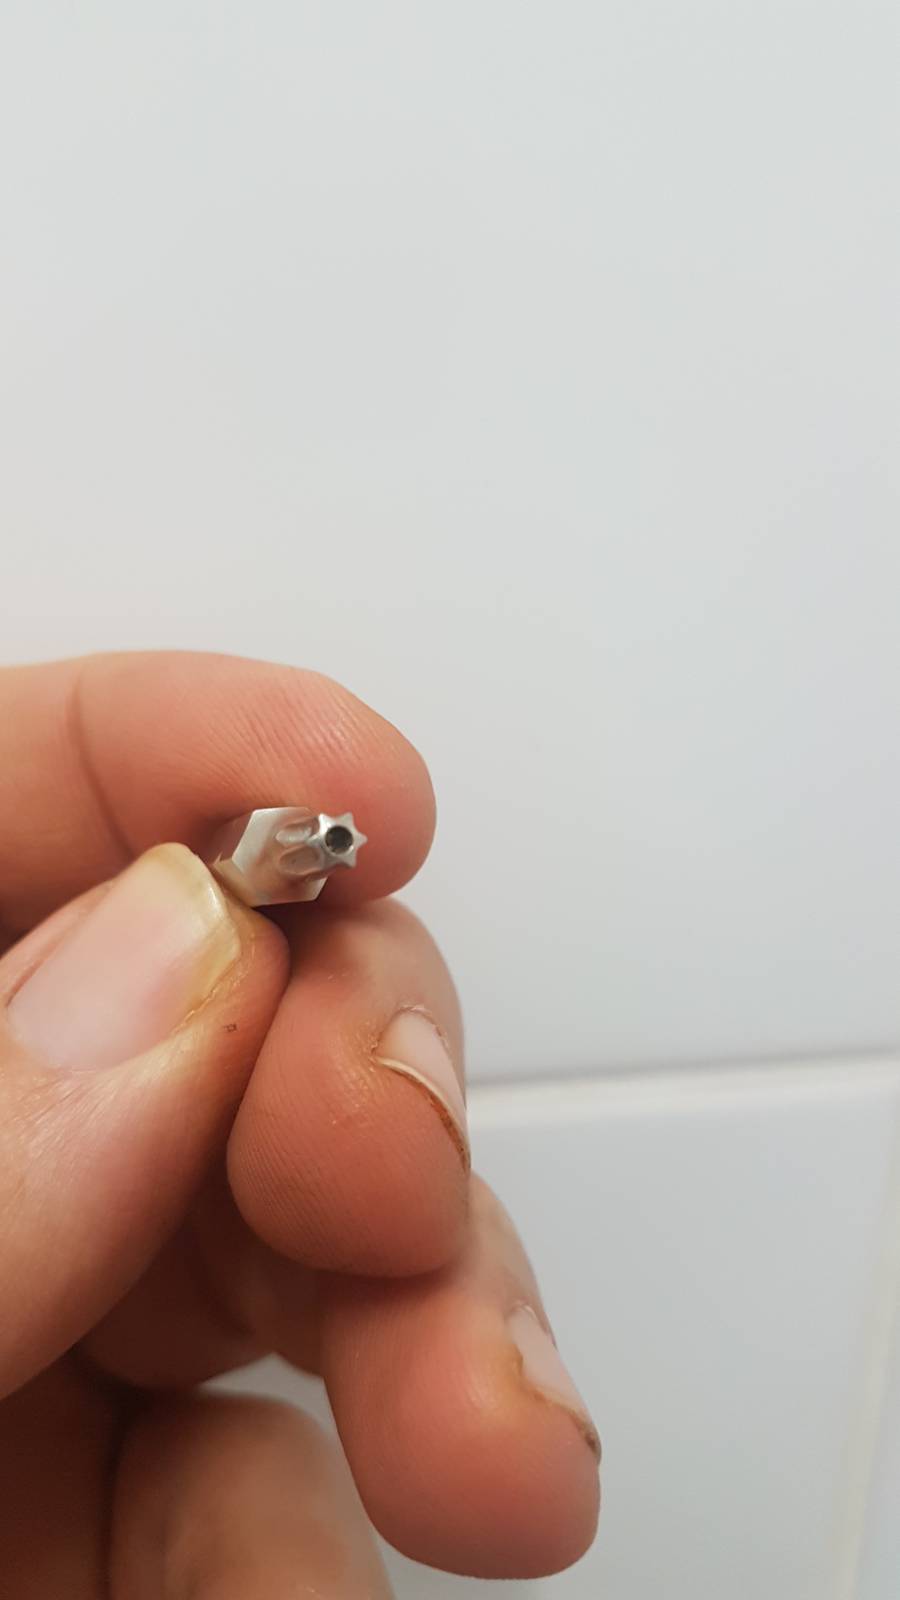 Undoing rounded hex bolt on towel rail